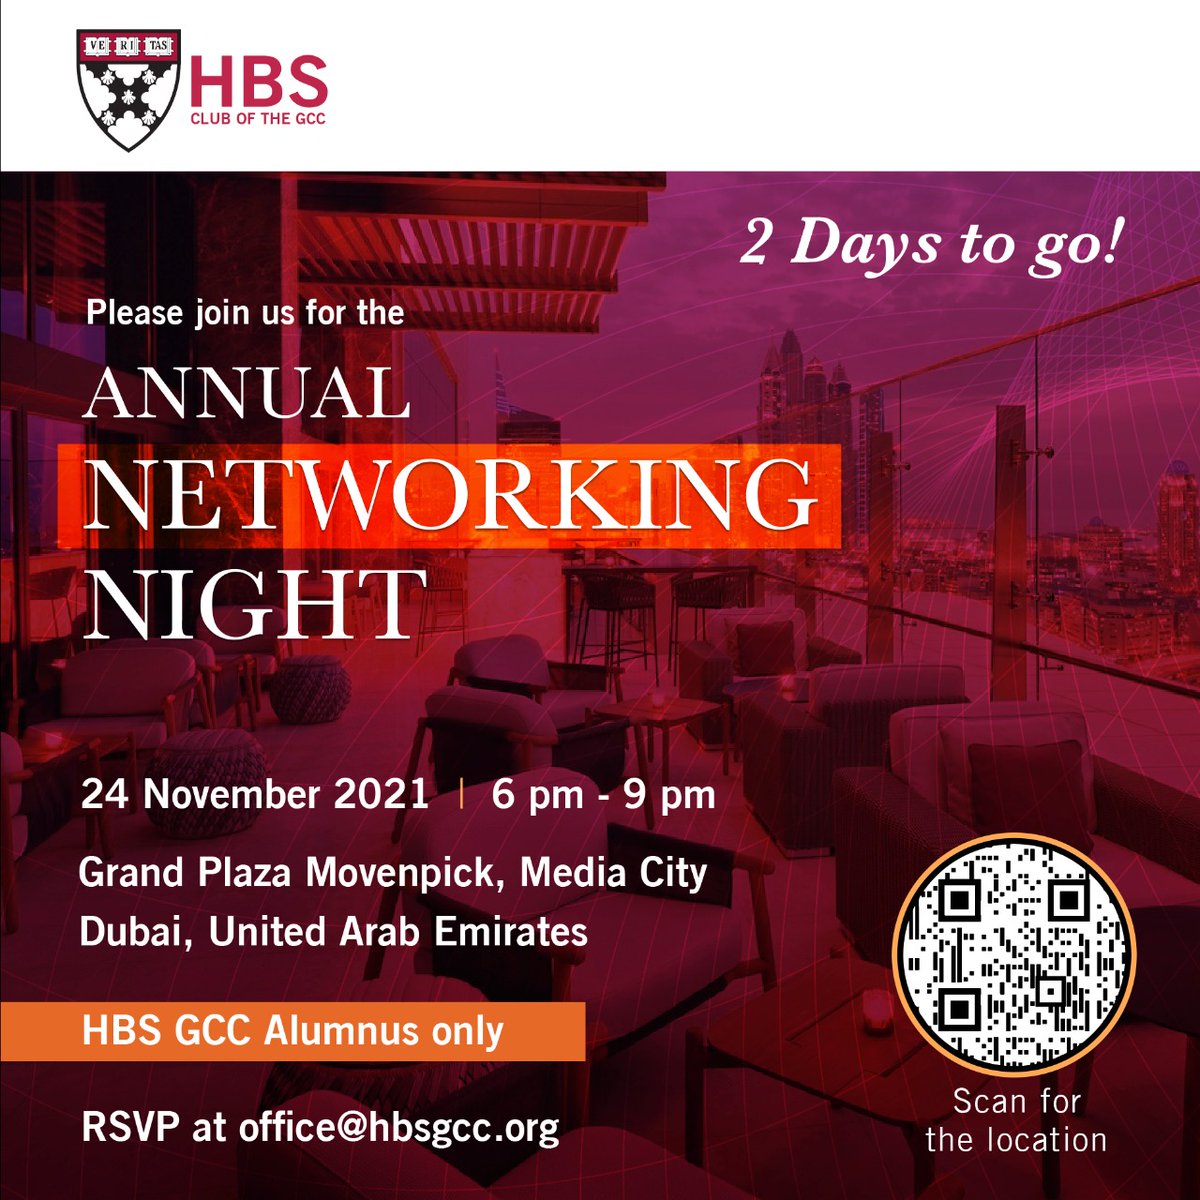 2 days to go for the HBS Club of the GCC Annual Networking Night! 

Join us for the exclusive networking night for the HBS Club of the GCC alumni on November 24th from 6 pm to 9 pm.

#HBSCluboftheGCC #networkingnight #togetherwegrow #physicalevent #networking #Dubai